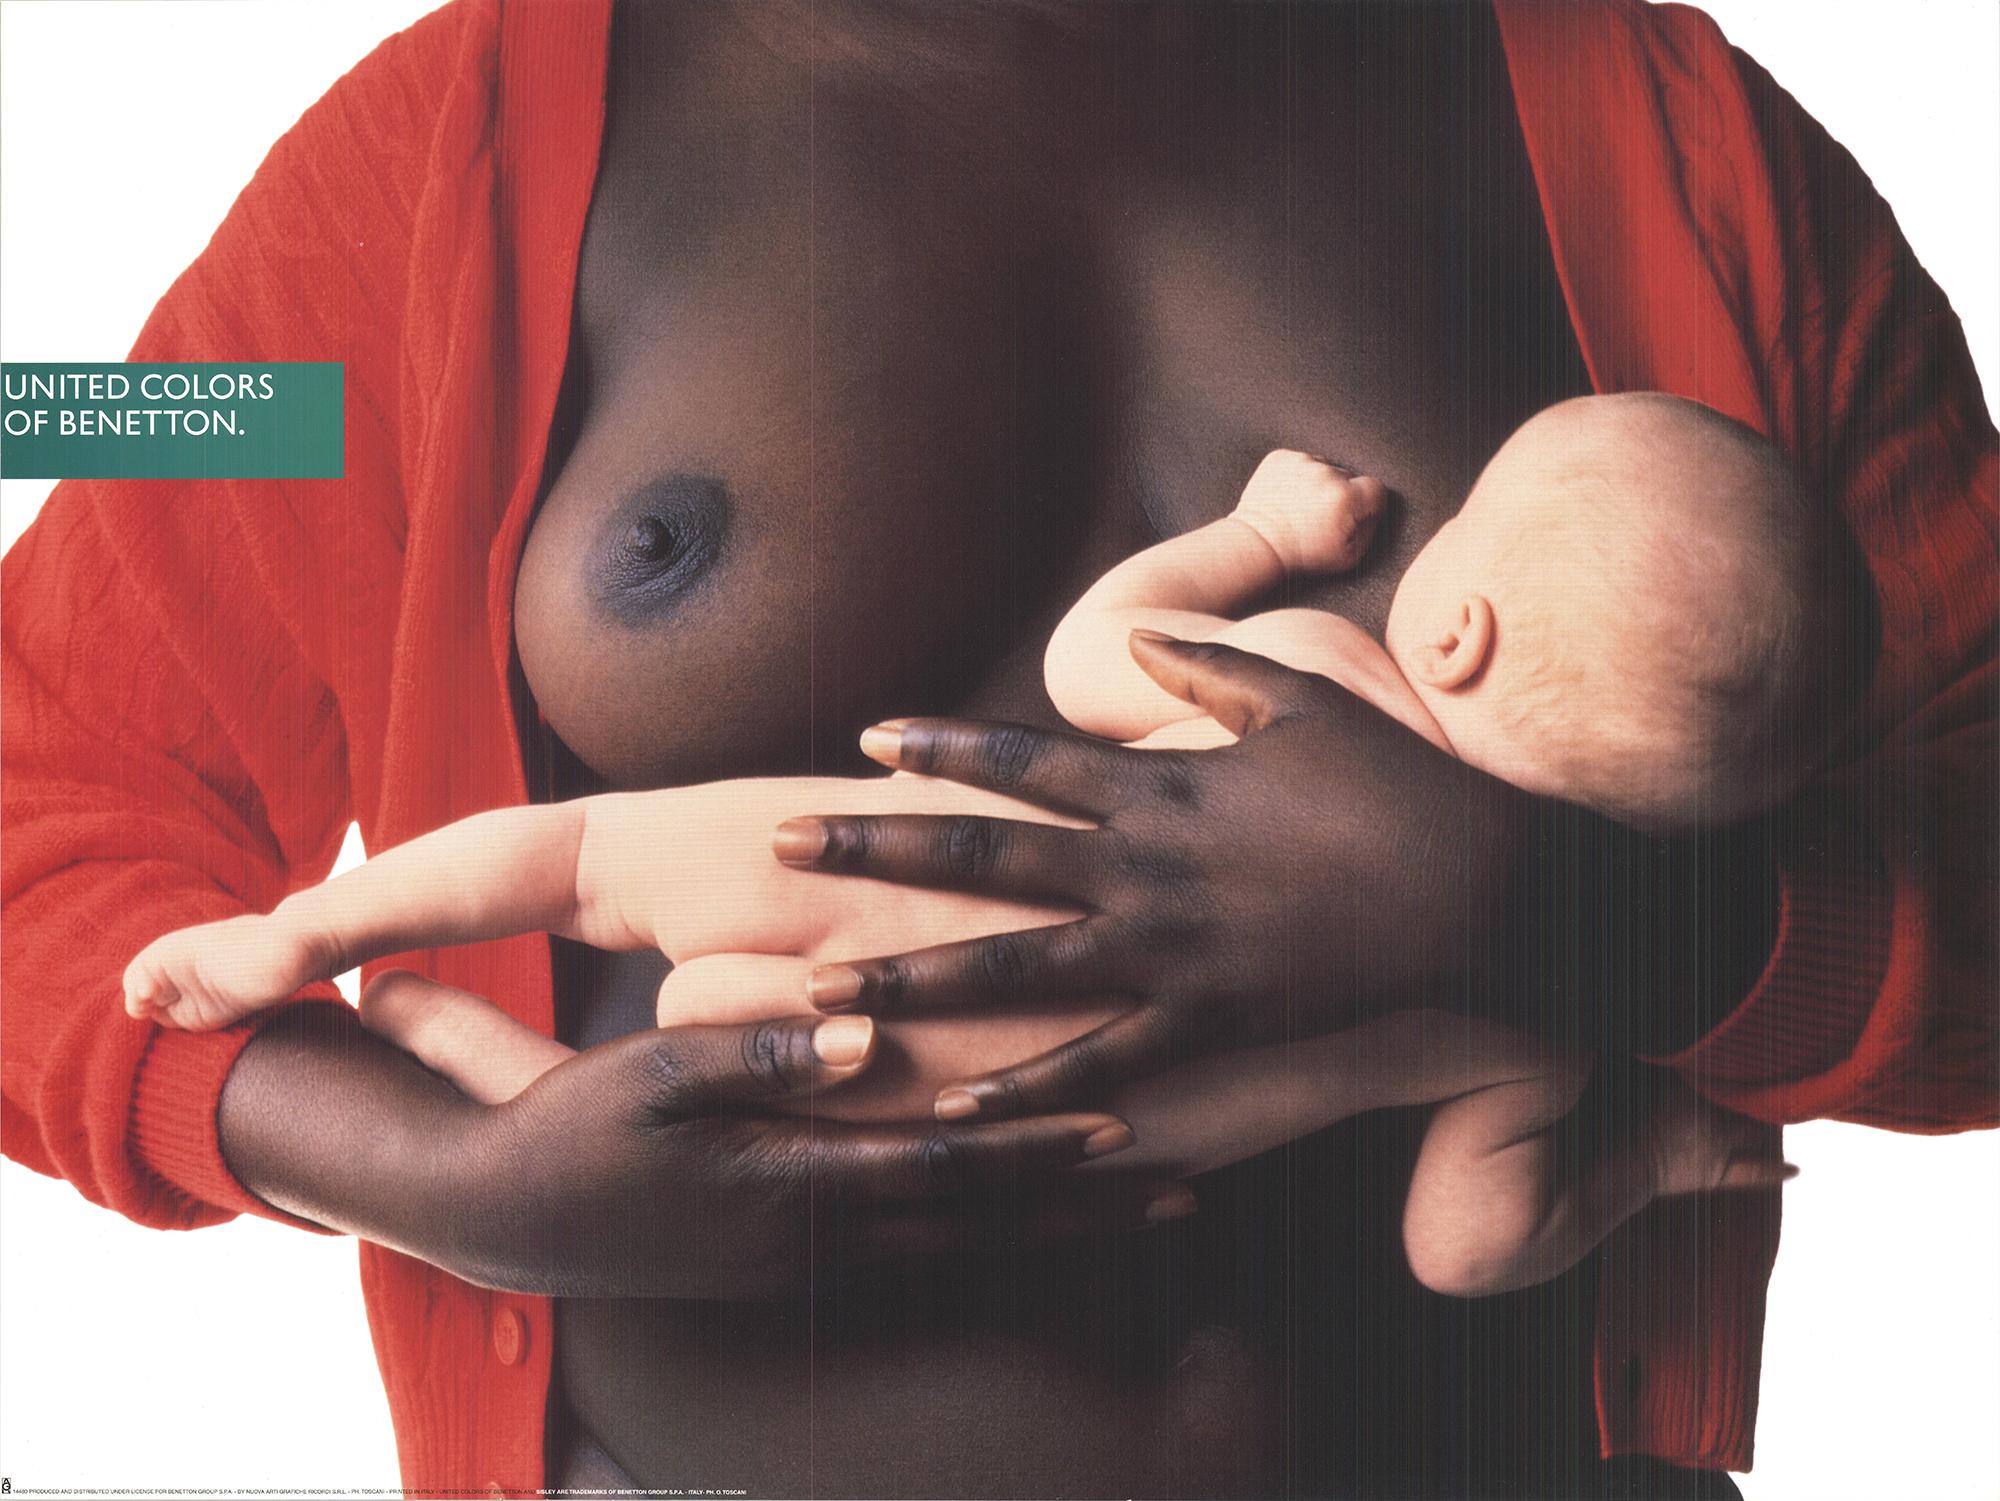 Oliverio Toscani-United Colors of Benetton-23.5" x 31.5"-Poster-Brown, White, Red
